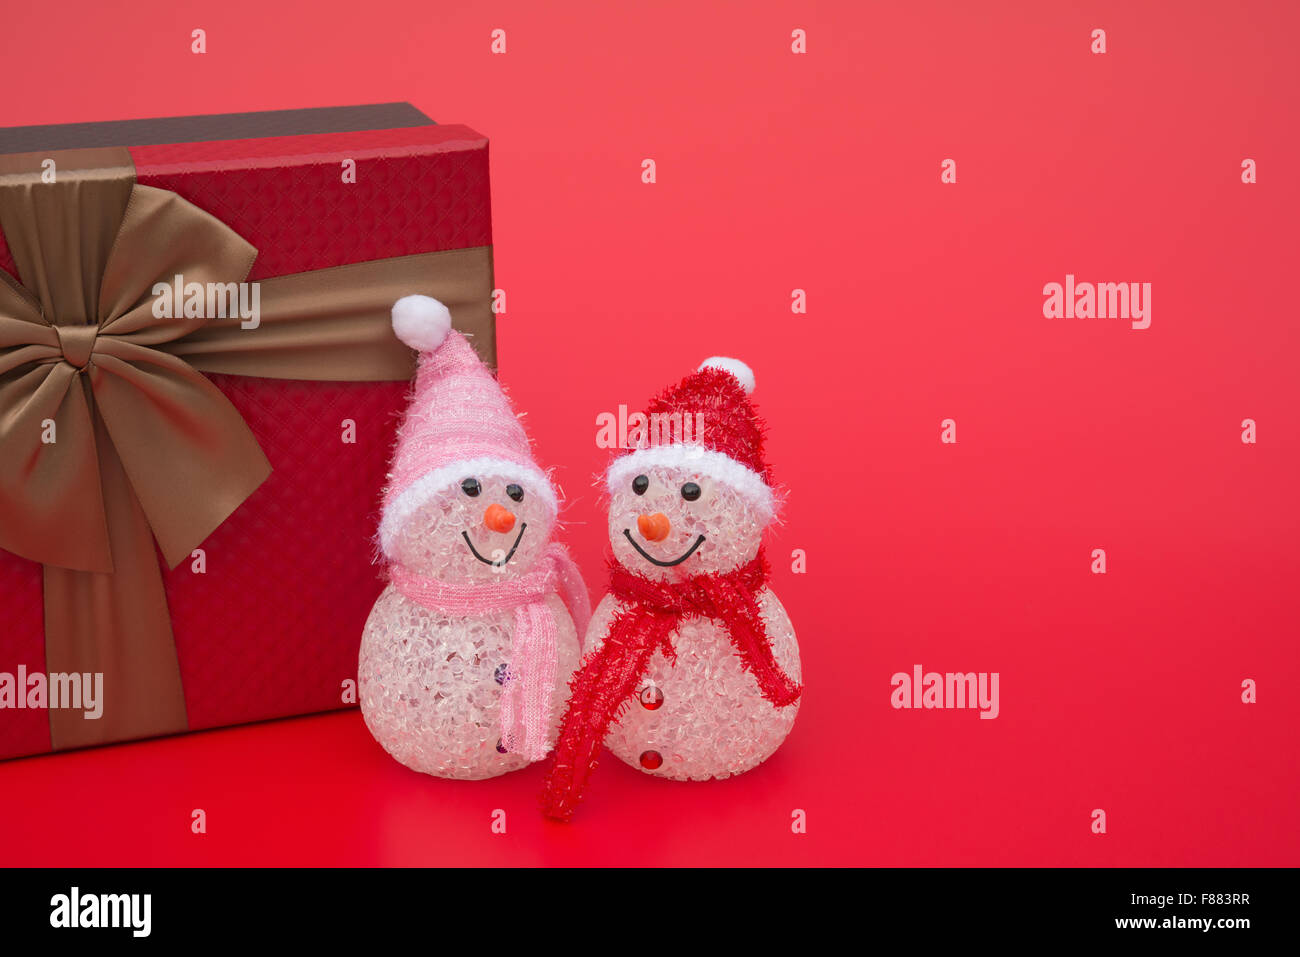 two smiling toy christmas snowman and a present box on red background with copy space Stock Photo